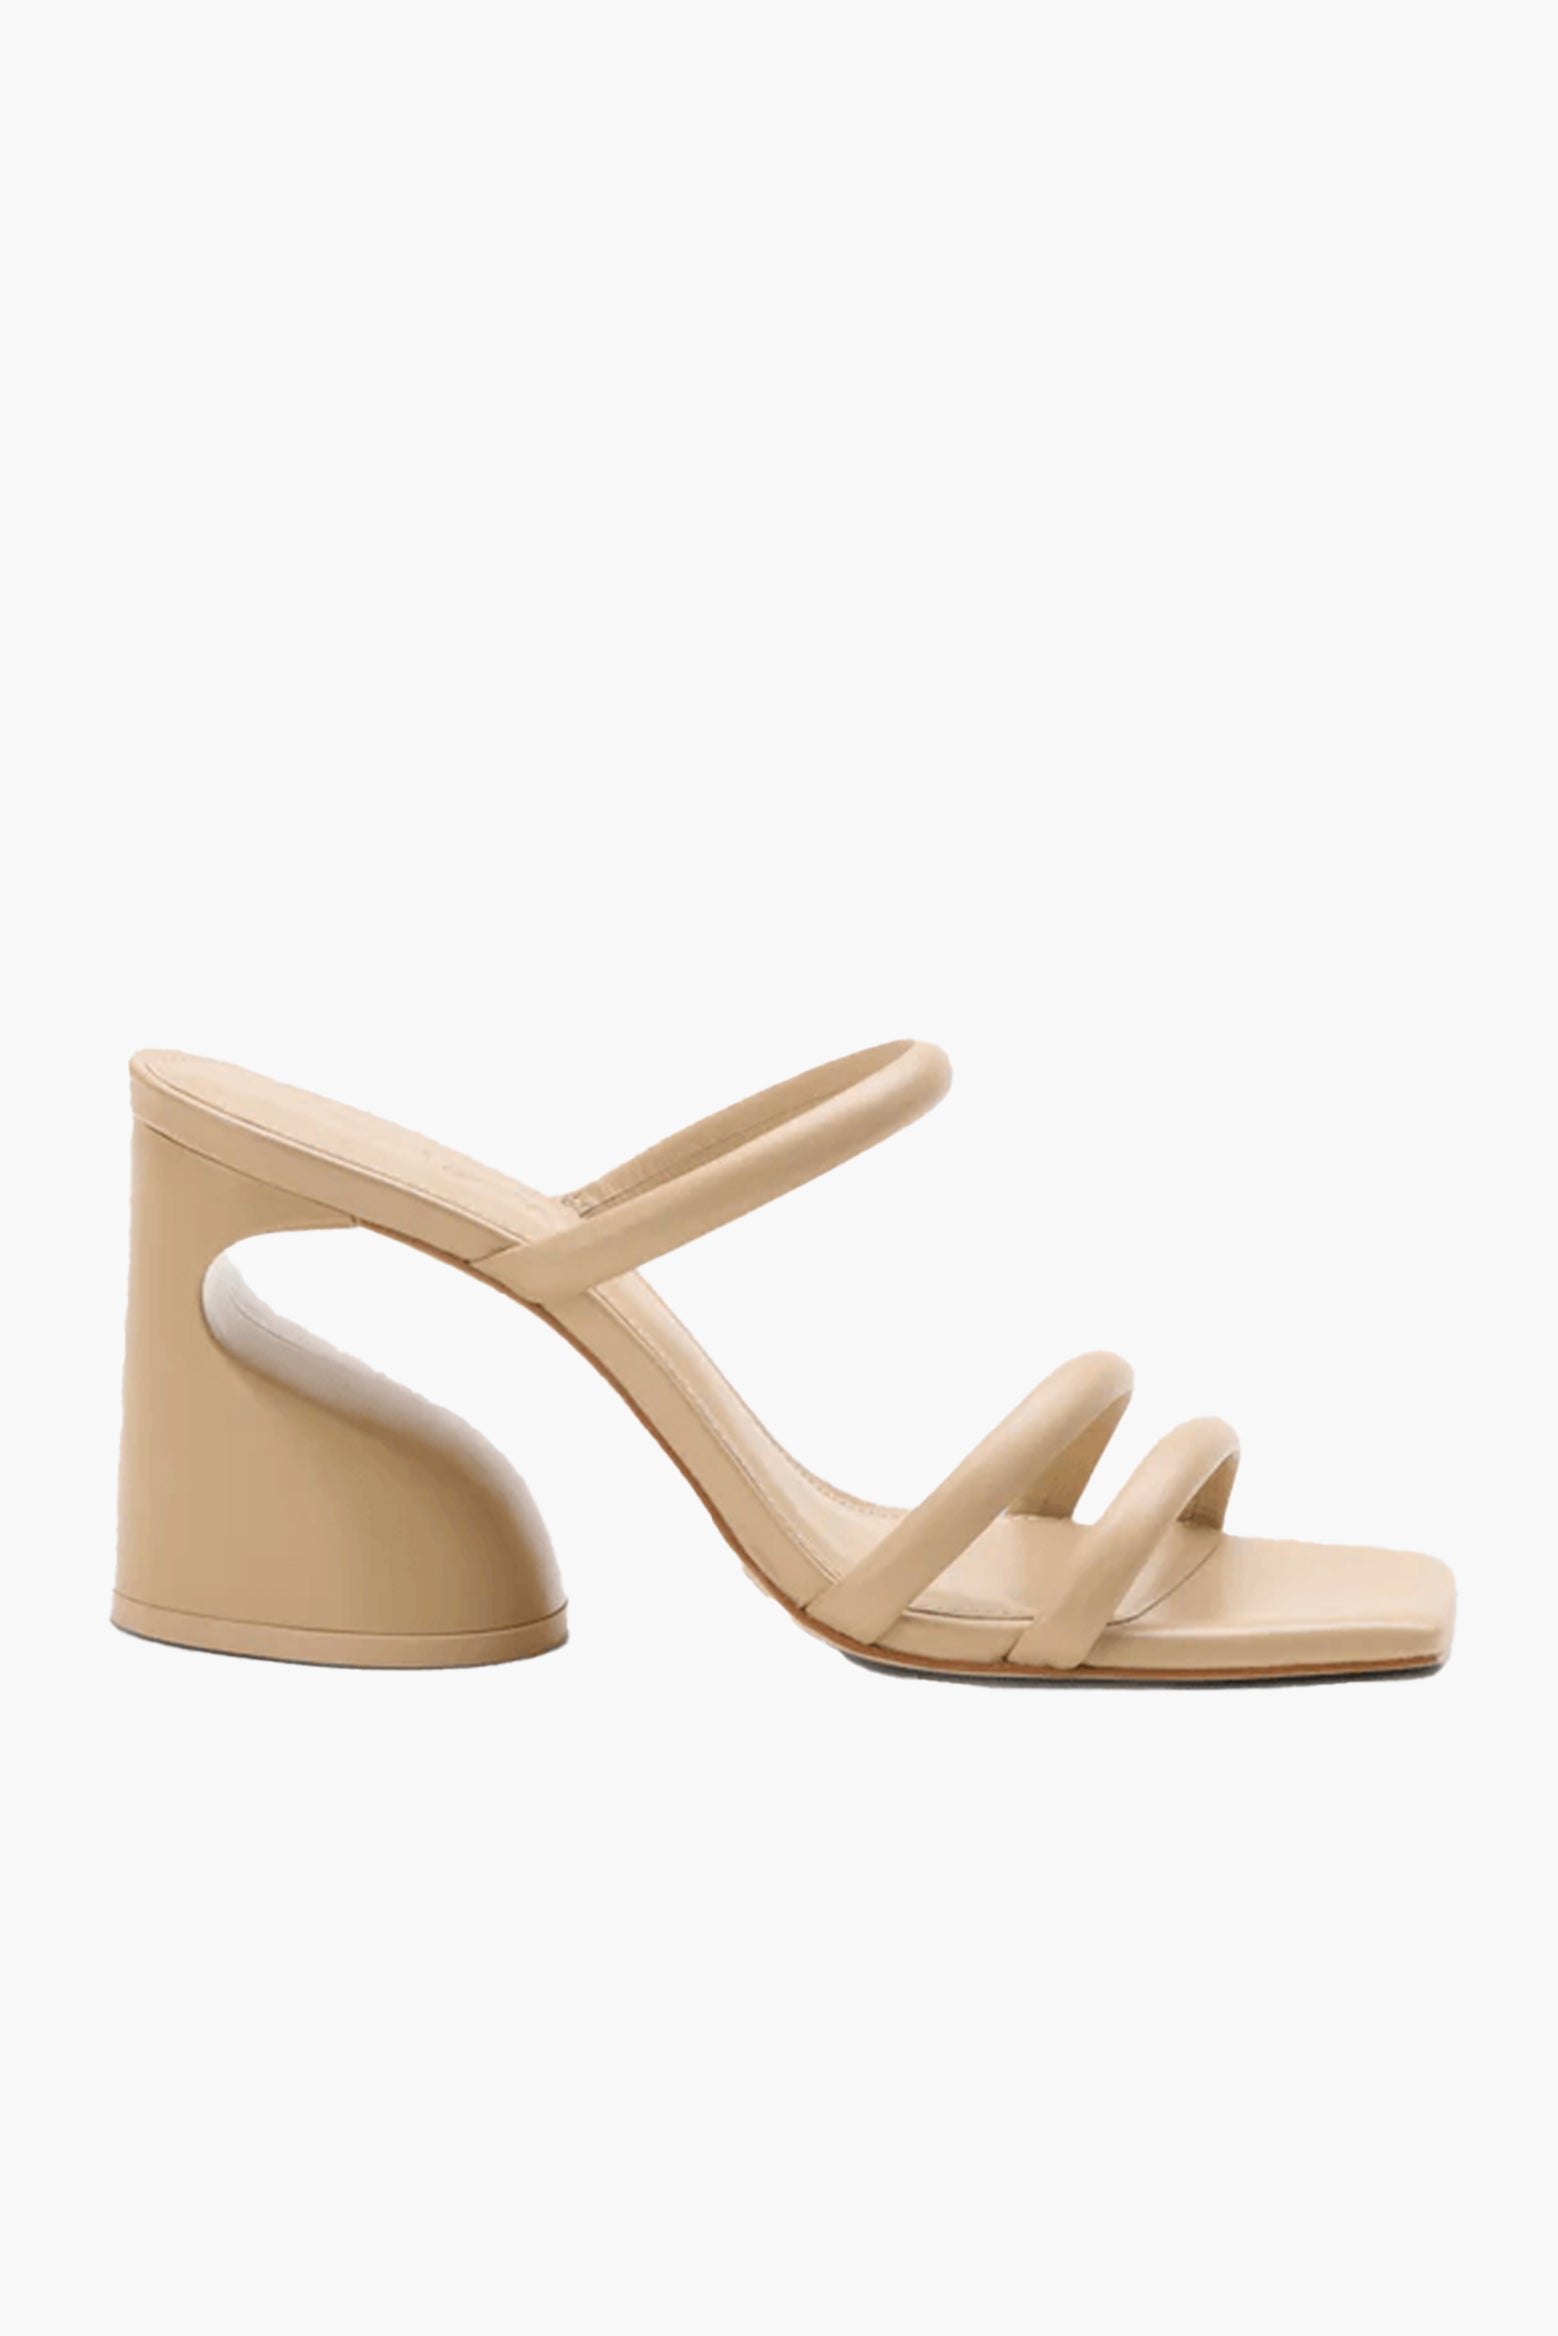 Cult Gaia Zuma Sandal in Sand available at The New Trend Australia.